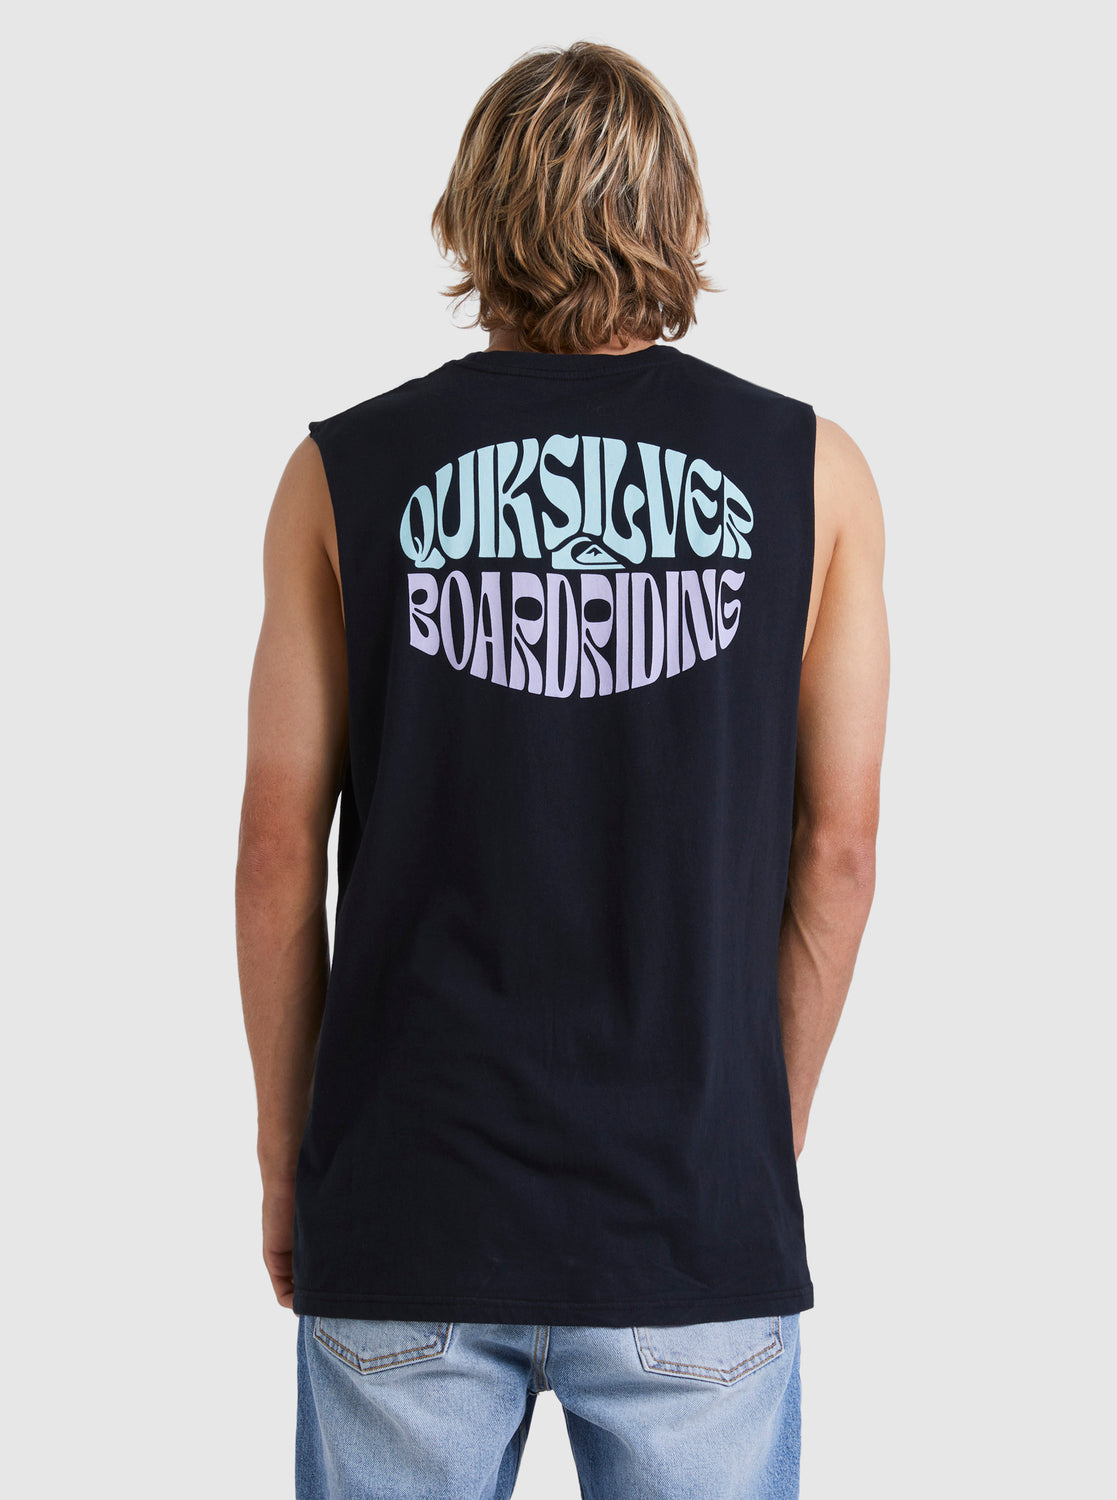 Quiksilver Bold Move Muscle Tee in black colourway from back